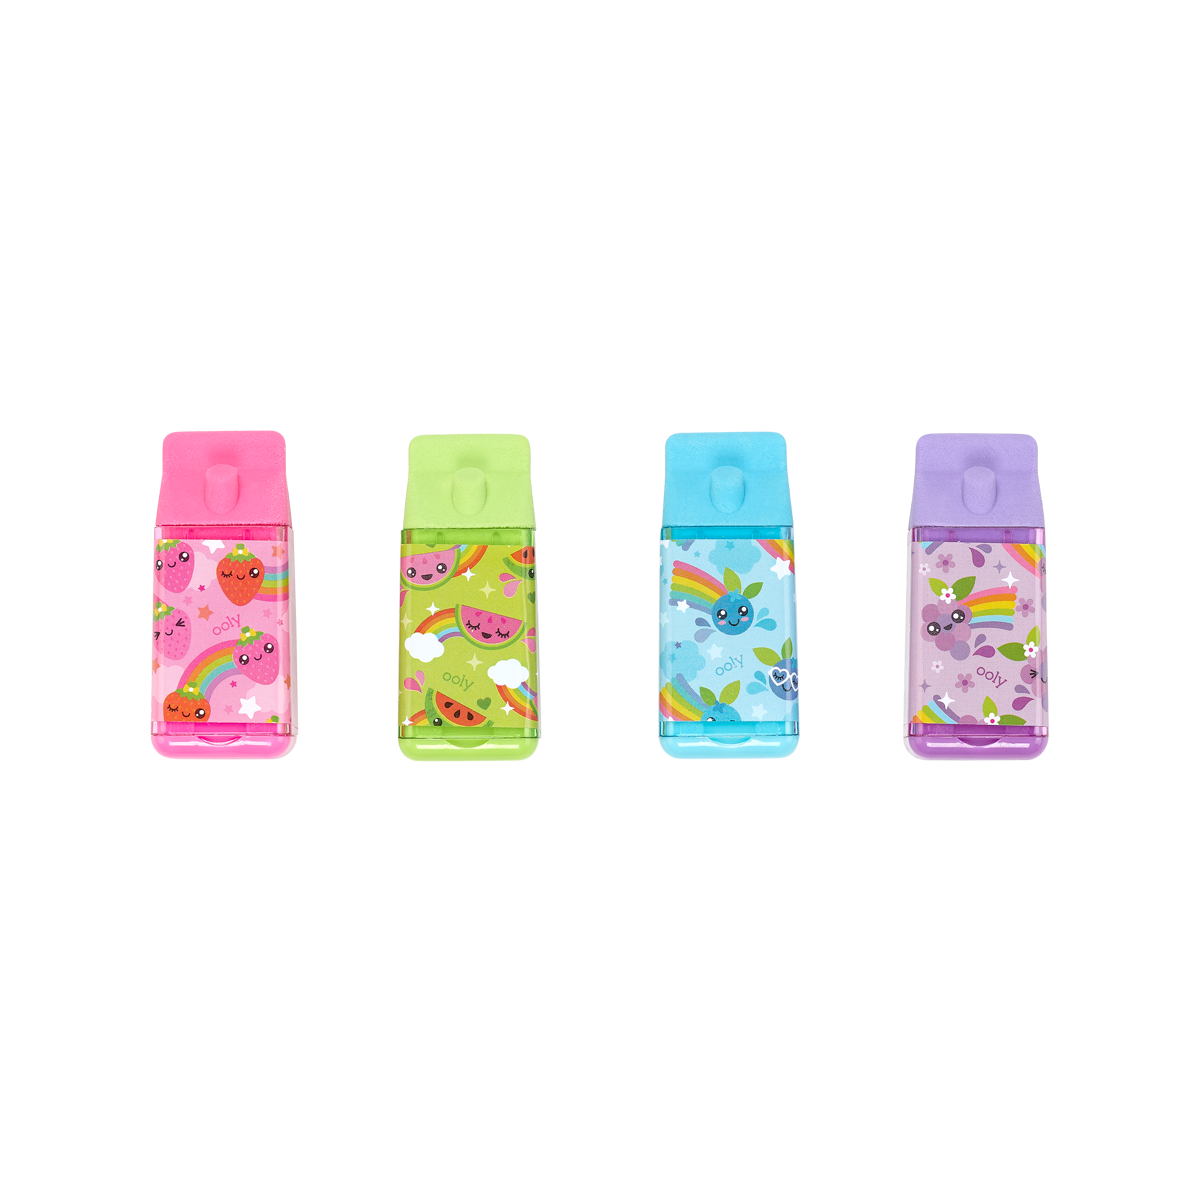 Erasers For Kids, 6 Pack, Eraser With Cover And Roller, School Supplies,  Erasers, Kids Erasers, Pencil Eraser, Cute Erasers, Kids School Supplies